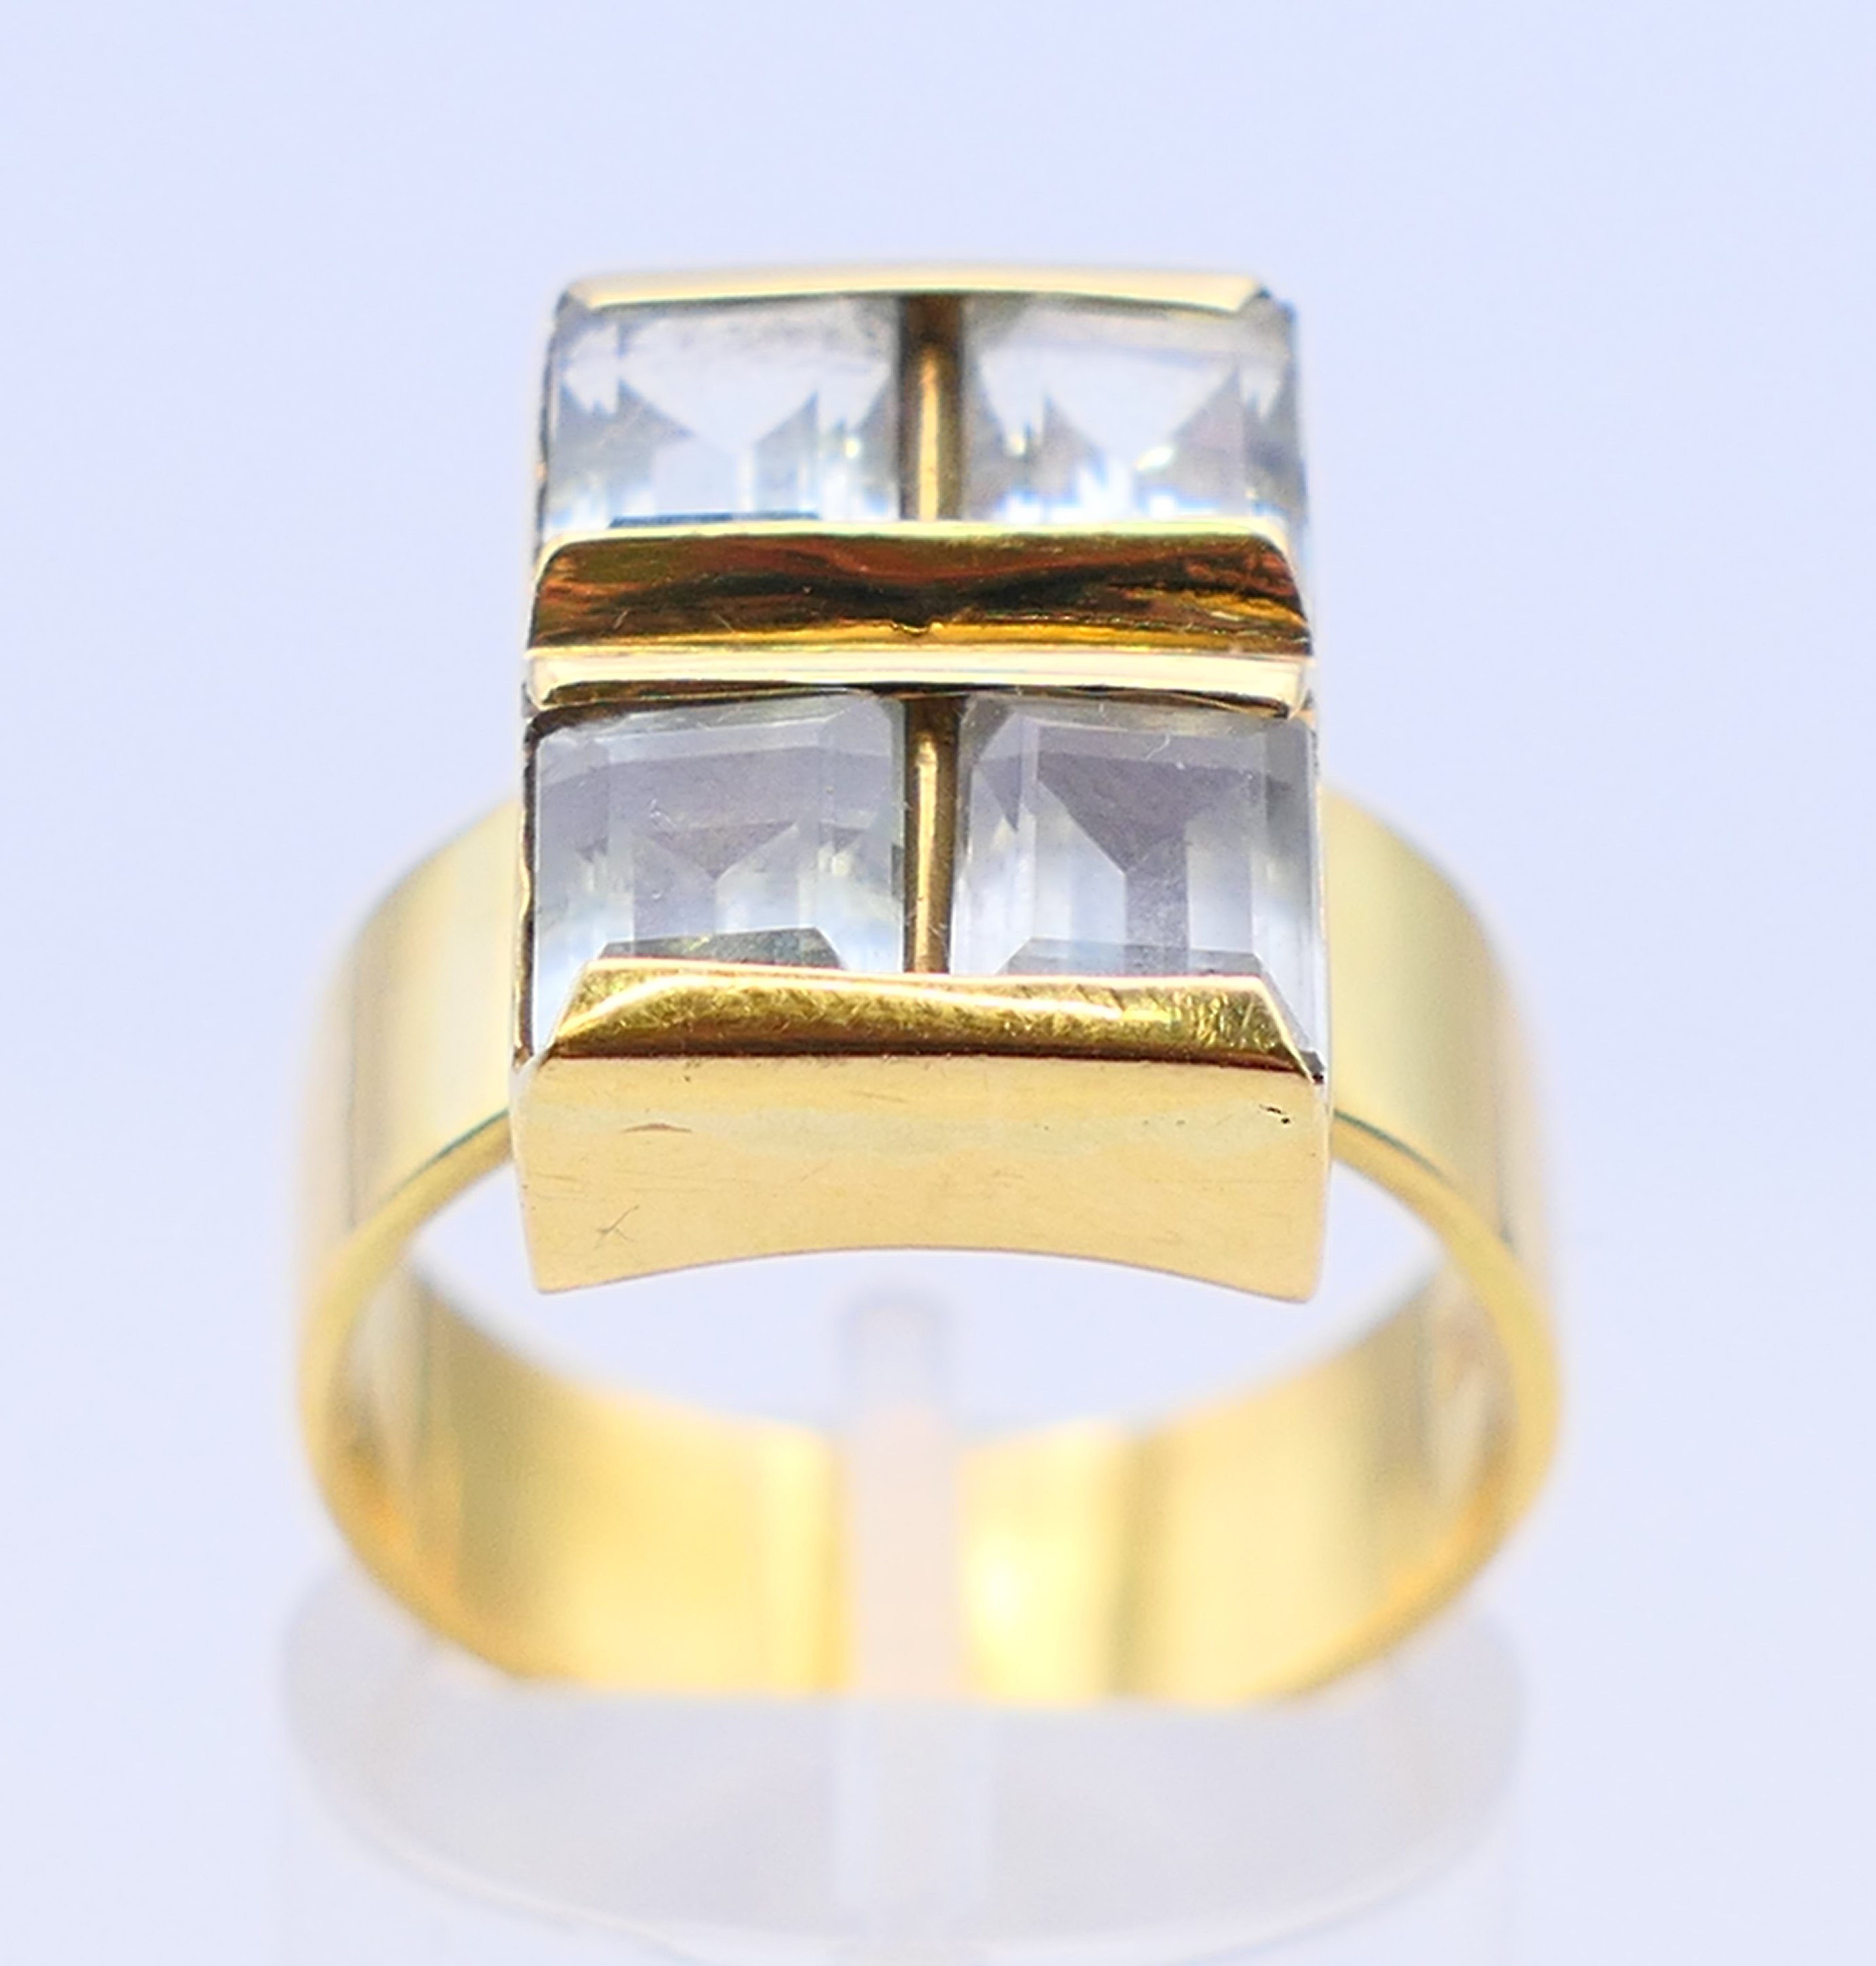 An 18 ct gold, aquamarine four stone ring, the emerald cut aquamarines 6 x 5mm x 3.9mm. Ring size O. - Image 2 of 7